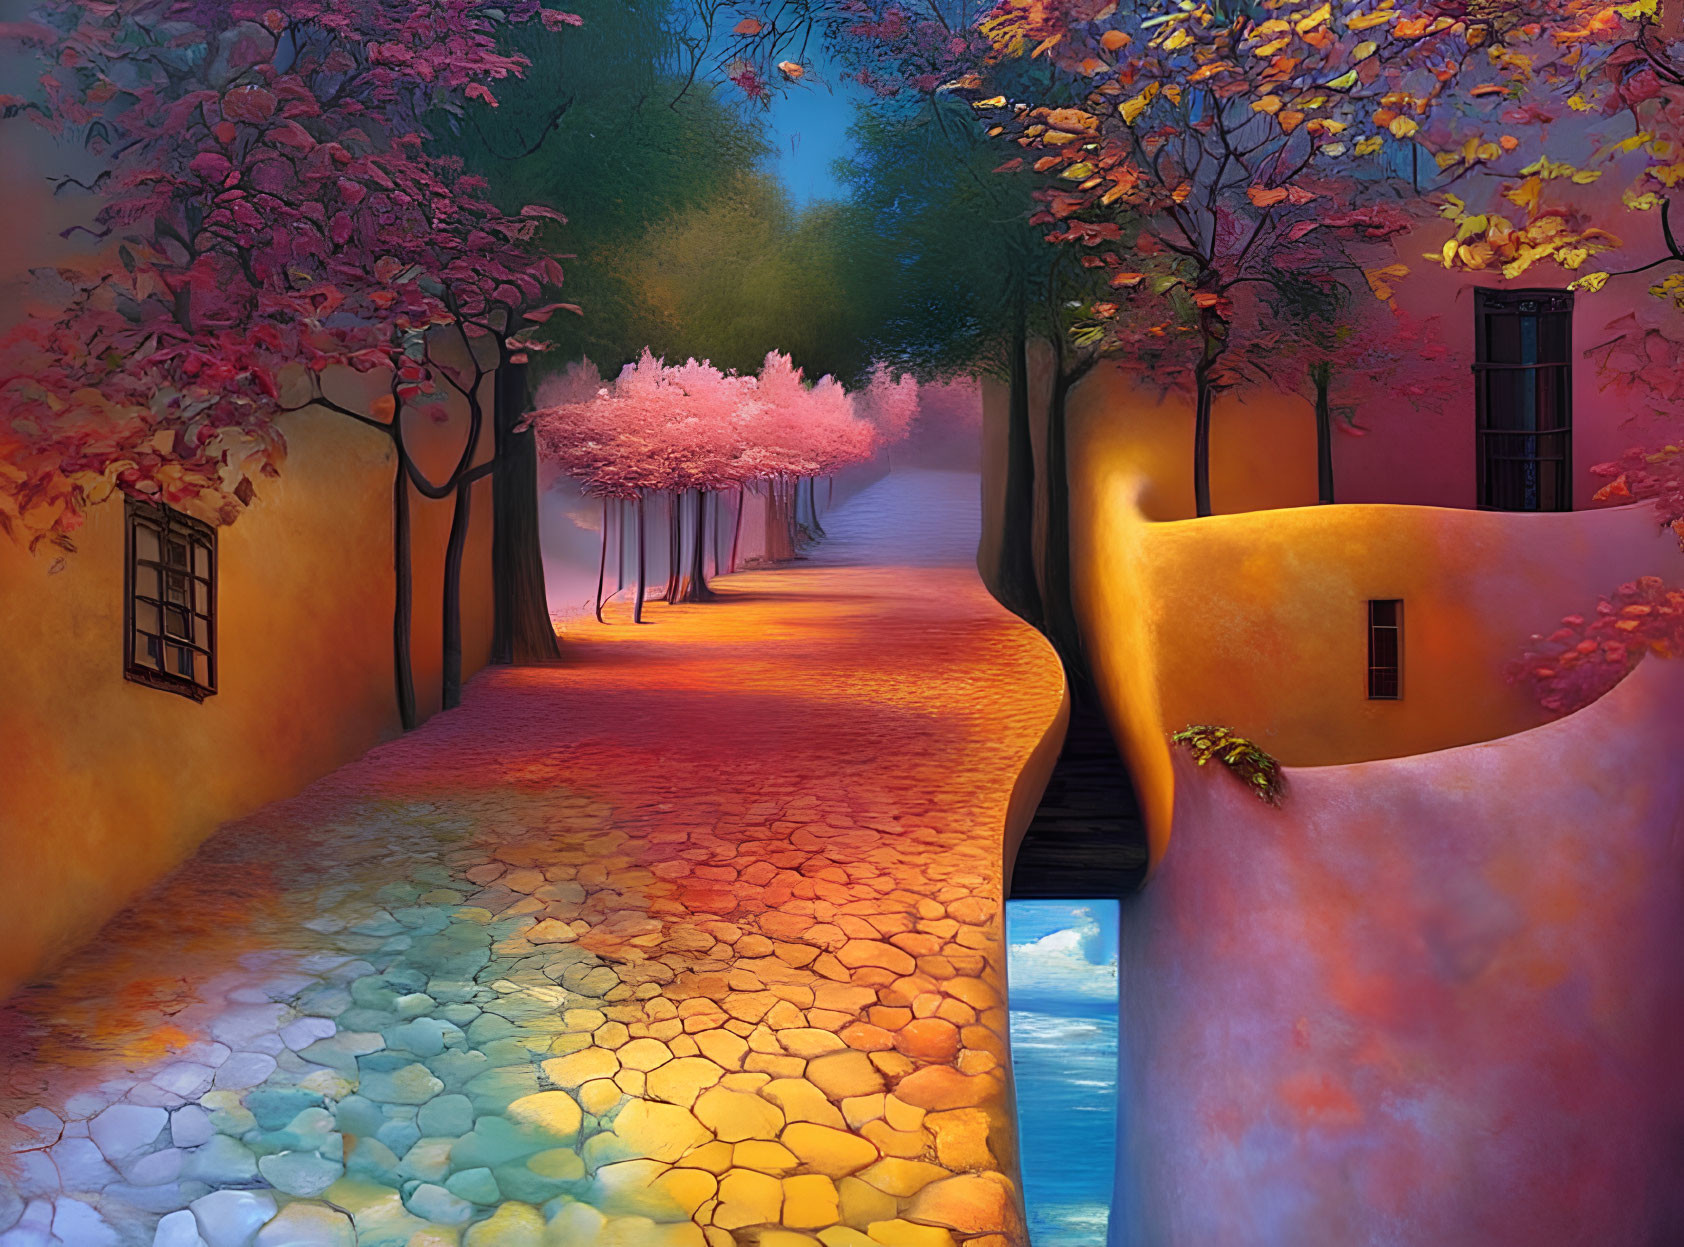 Vibrant autumn painting of cobblestone path in whimsical village